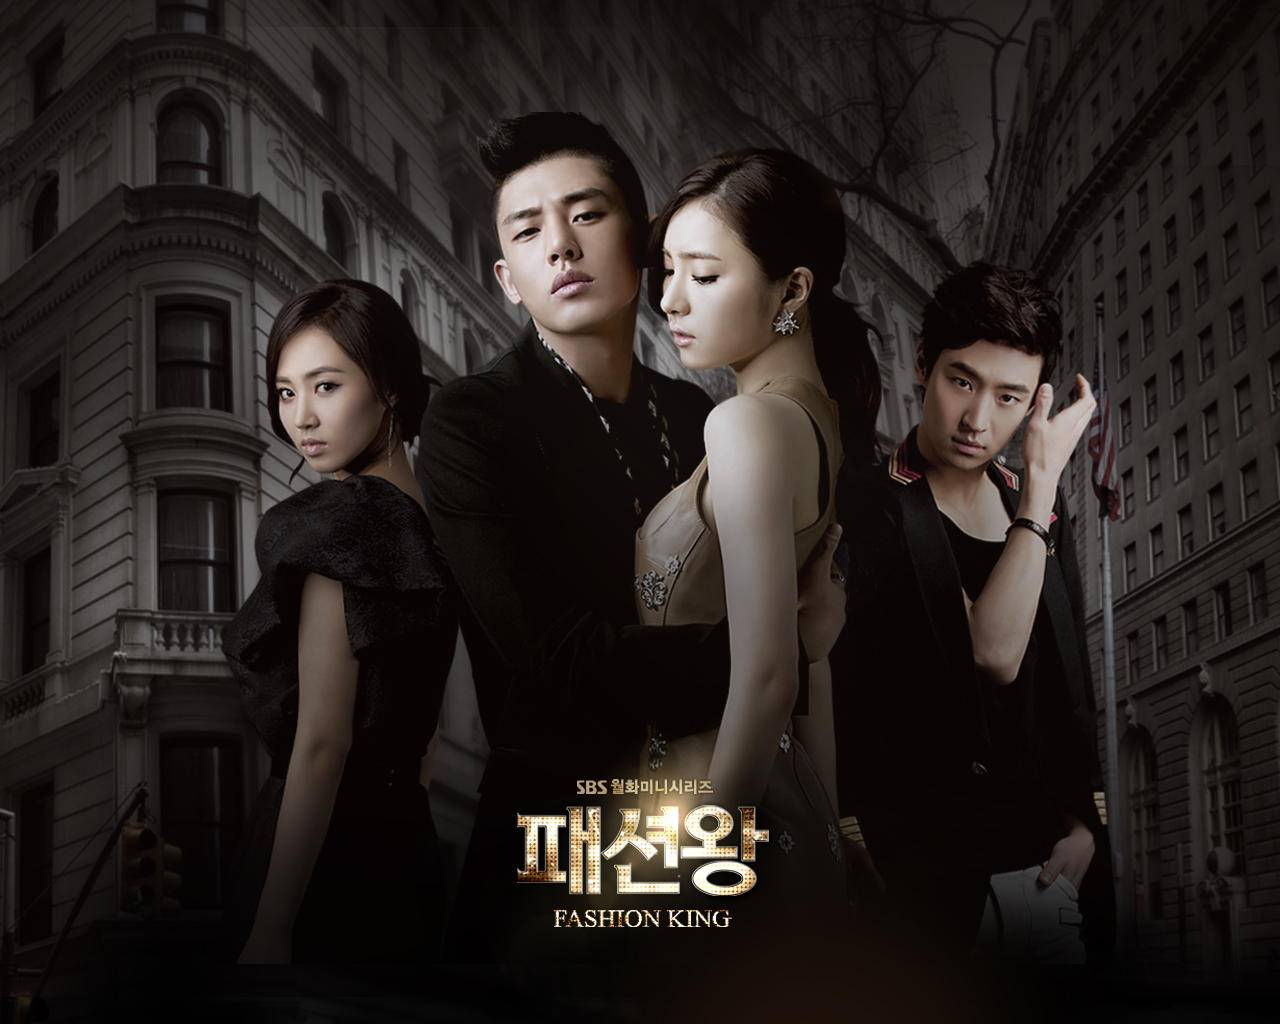 Fashion King (패션왕) - Drama - Picture Gallery @ HanCinema :: The Korean Movie and Drama Database